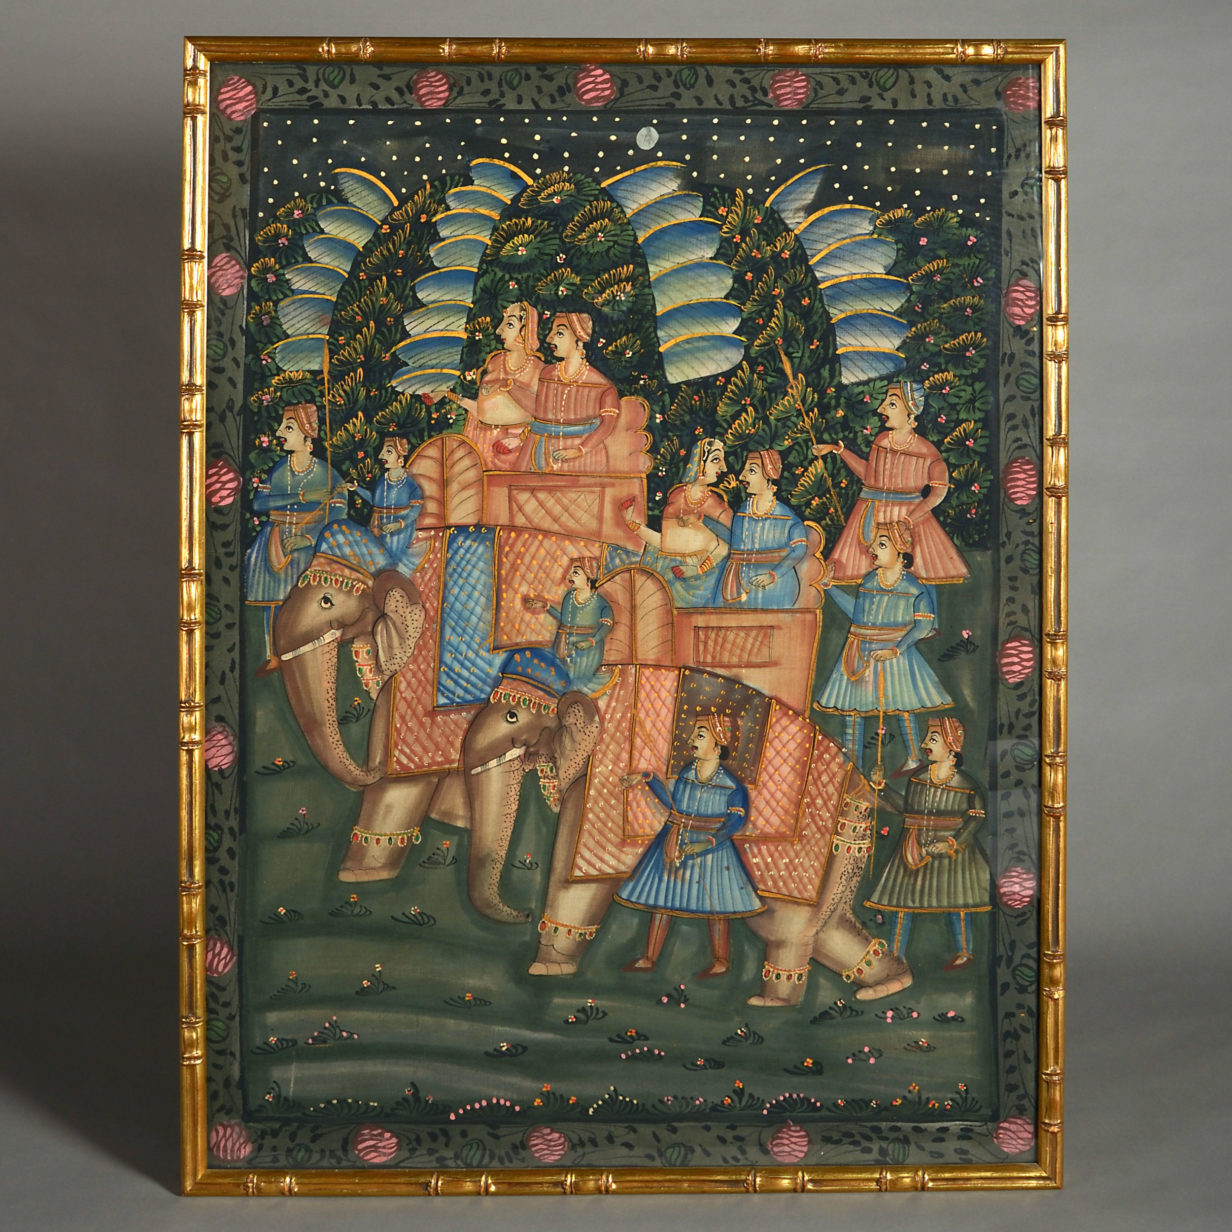 A large mid 20th century painted textile depicting an elephant procession